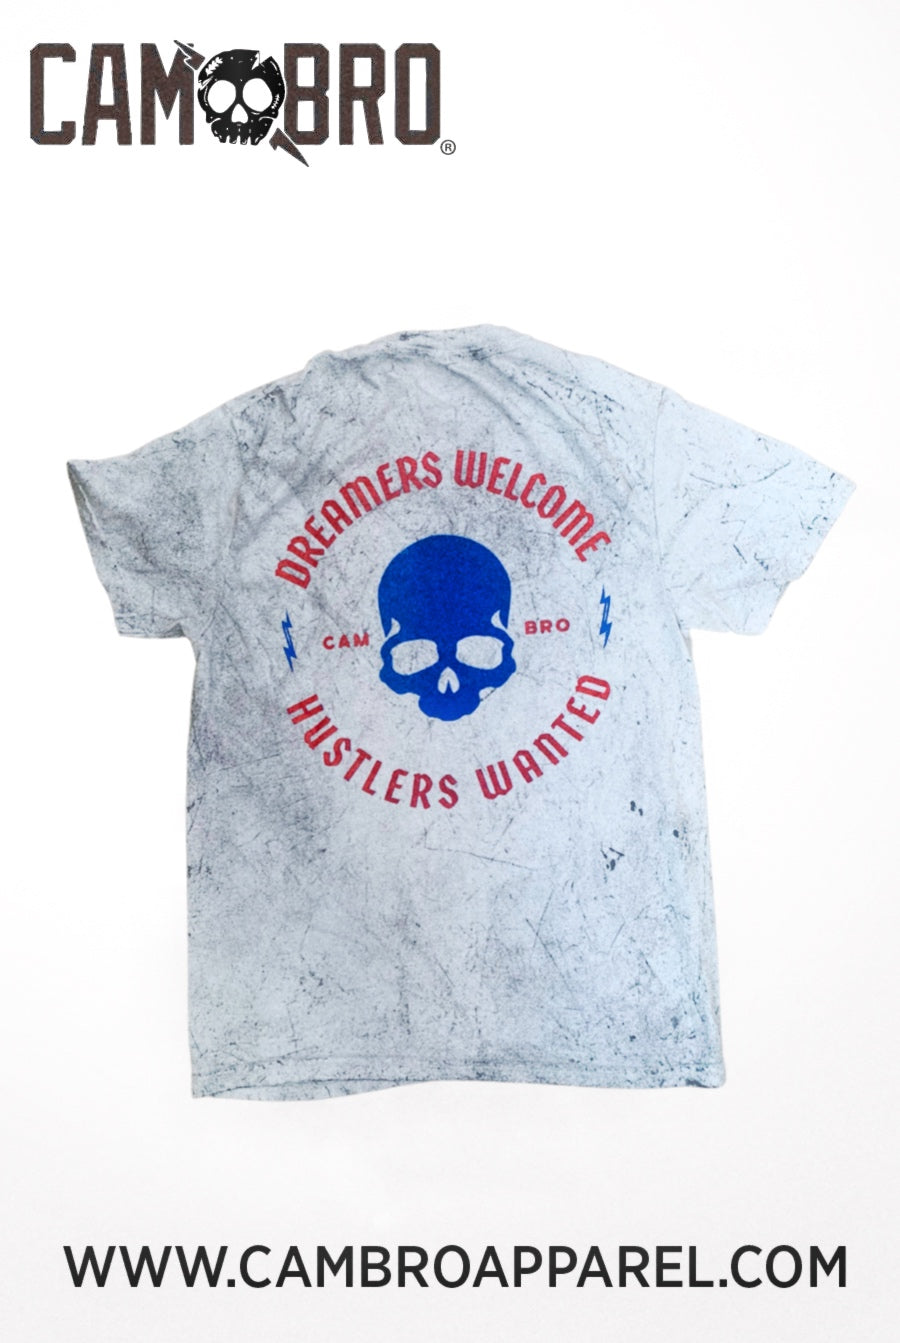 Dreamers Welcome, Hustlers Wanted v4 Unisex Tee Drip